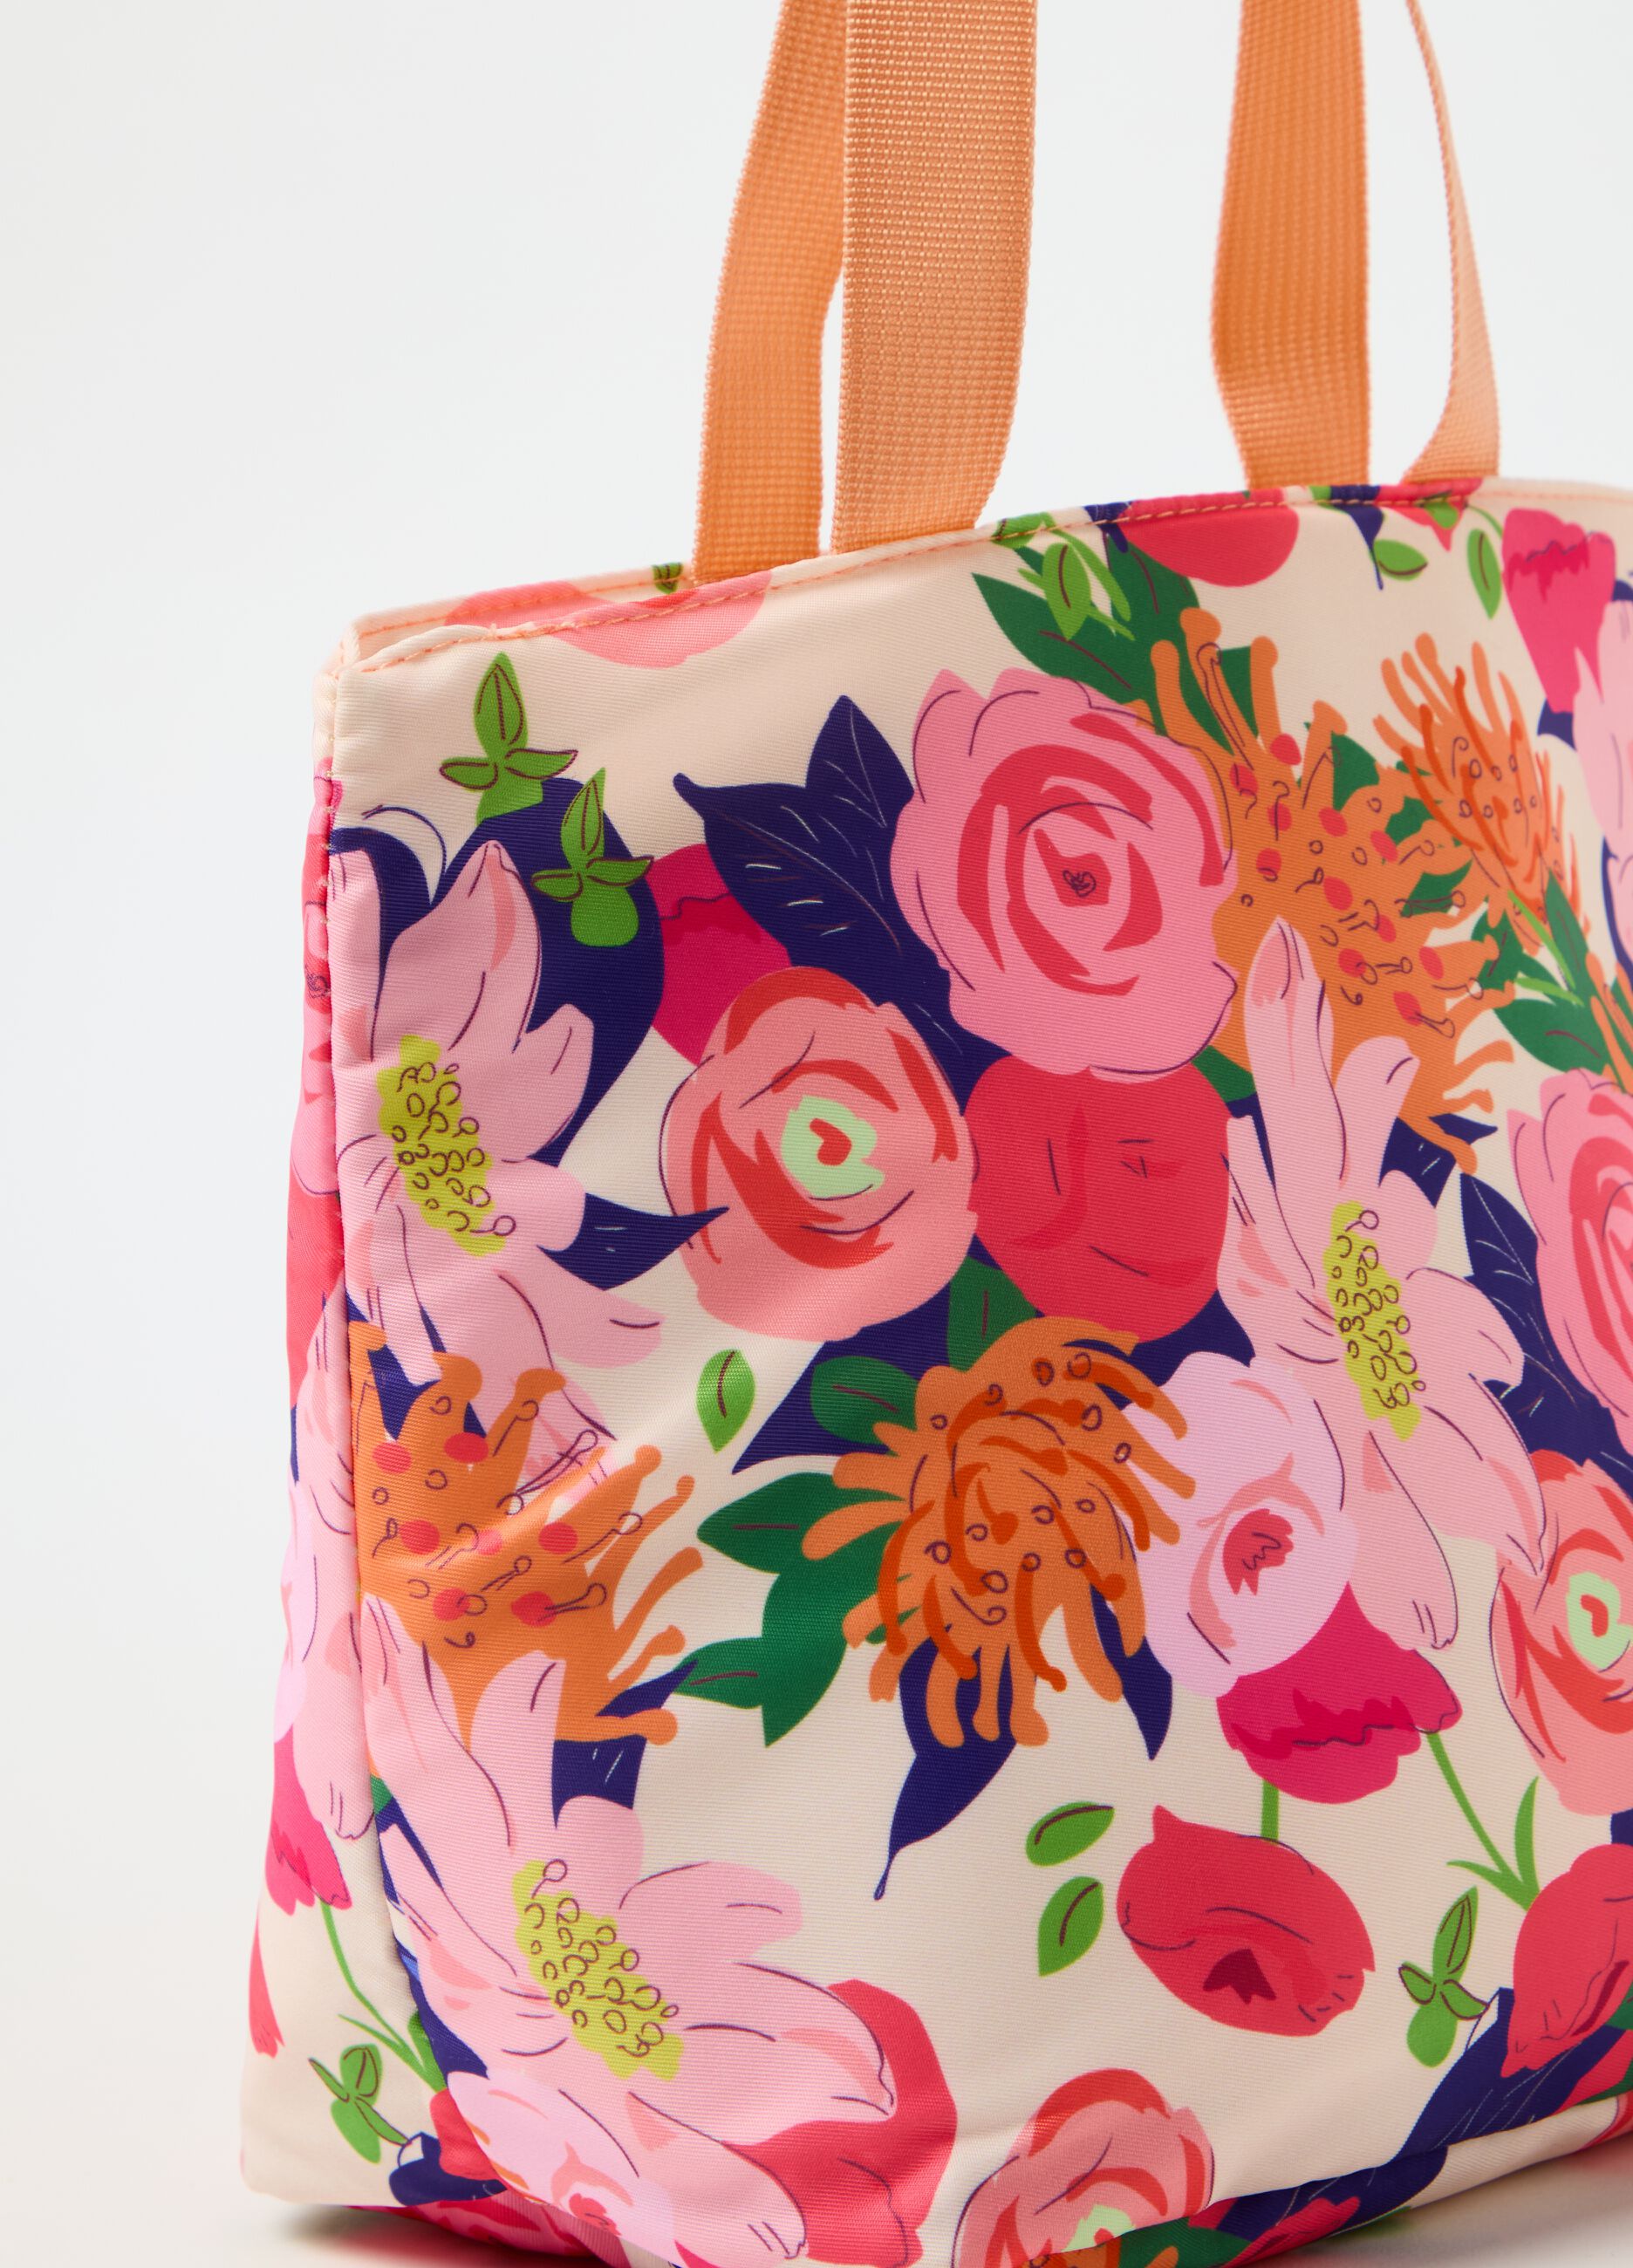 Floral lunch tote bag